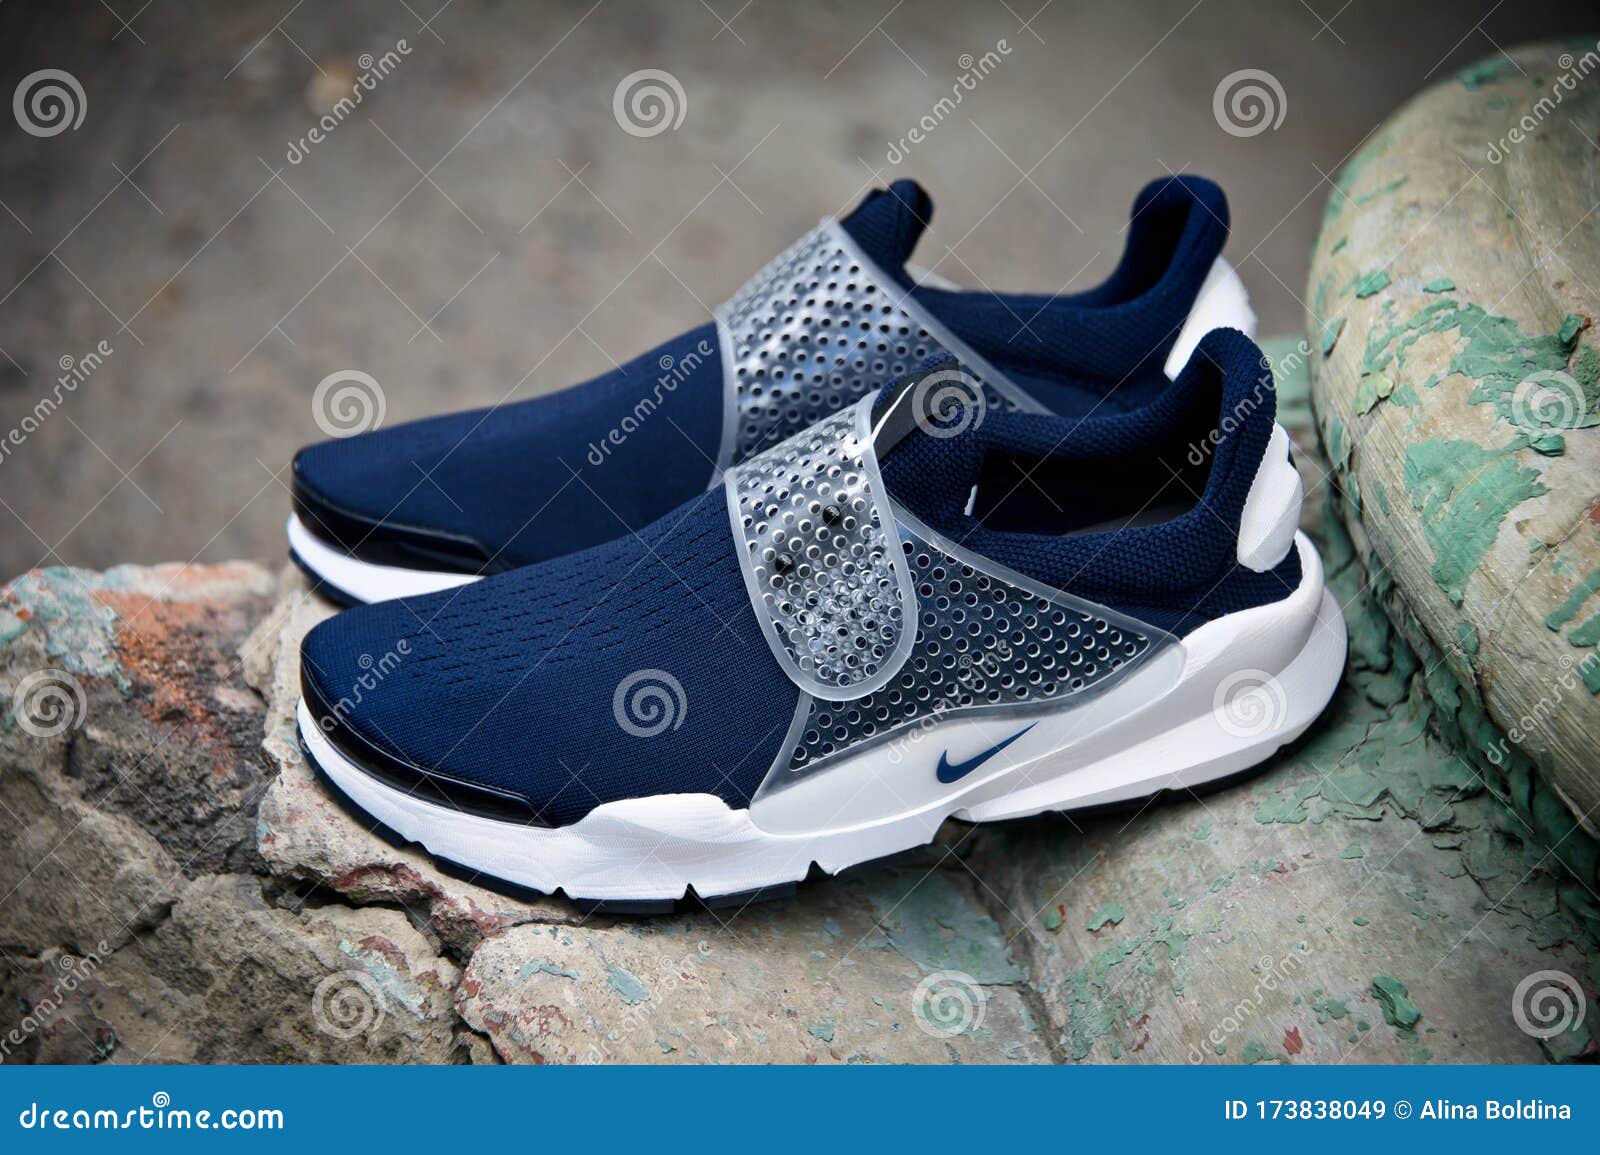 nike sock dart with laces